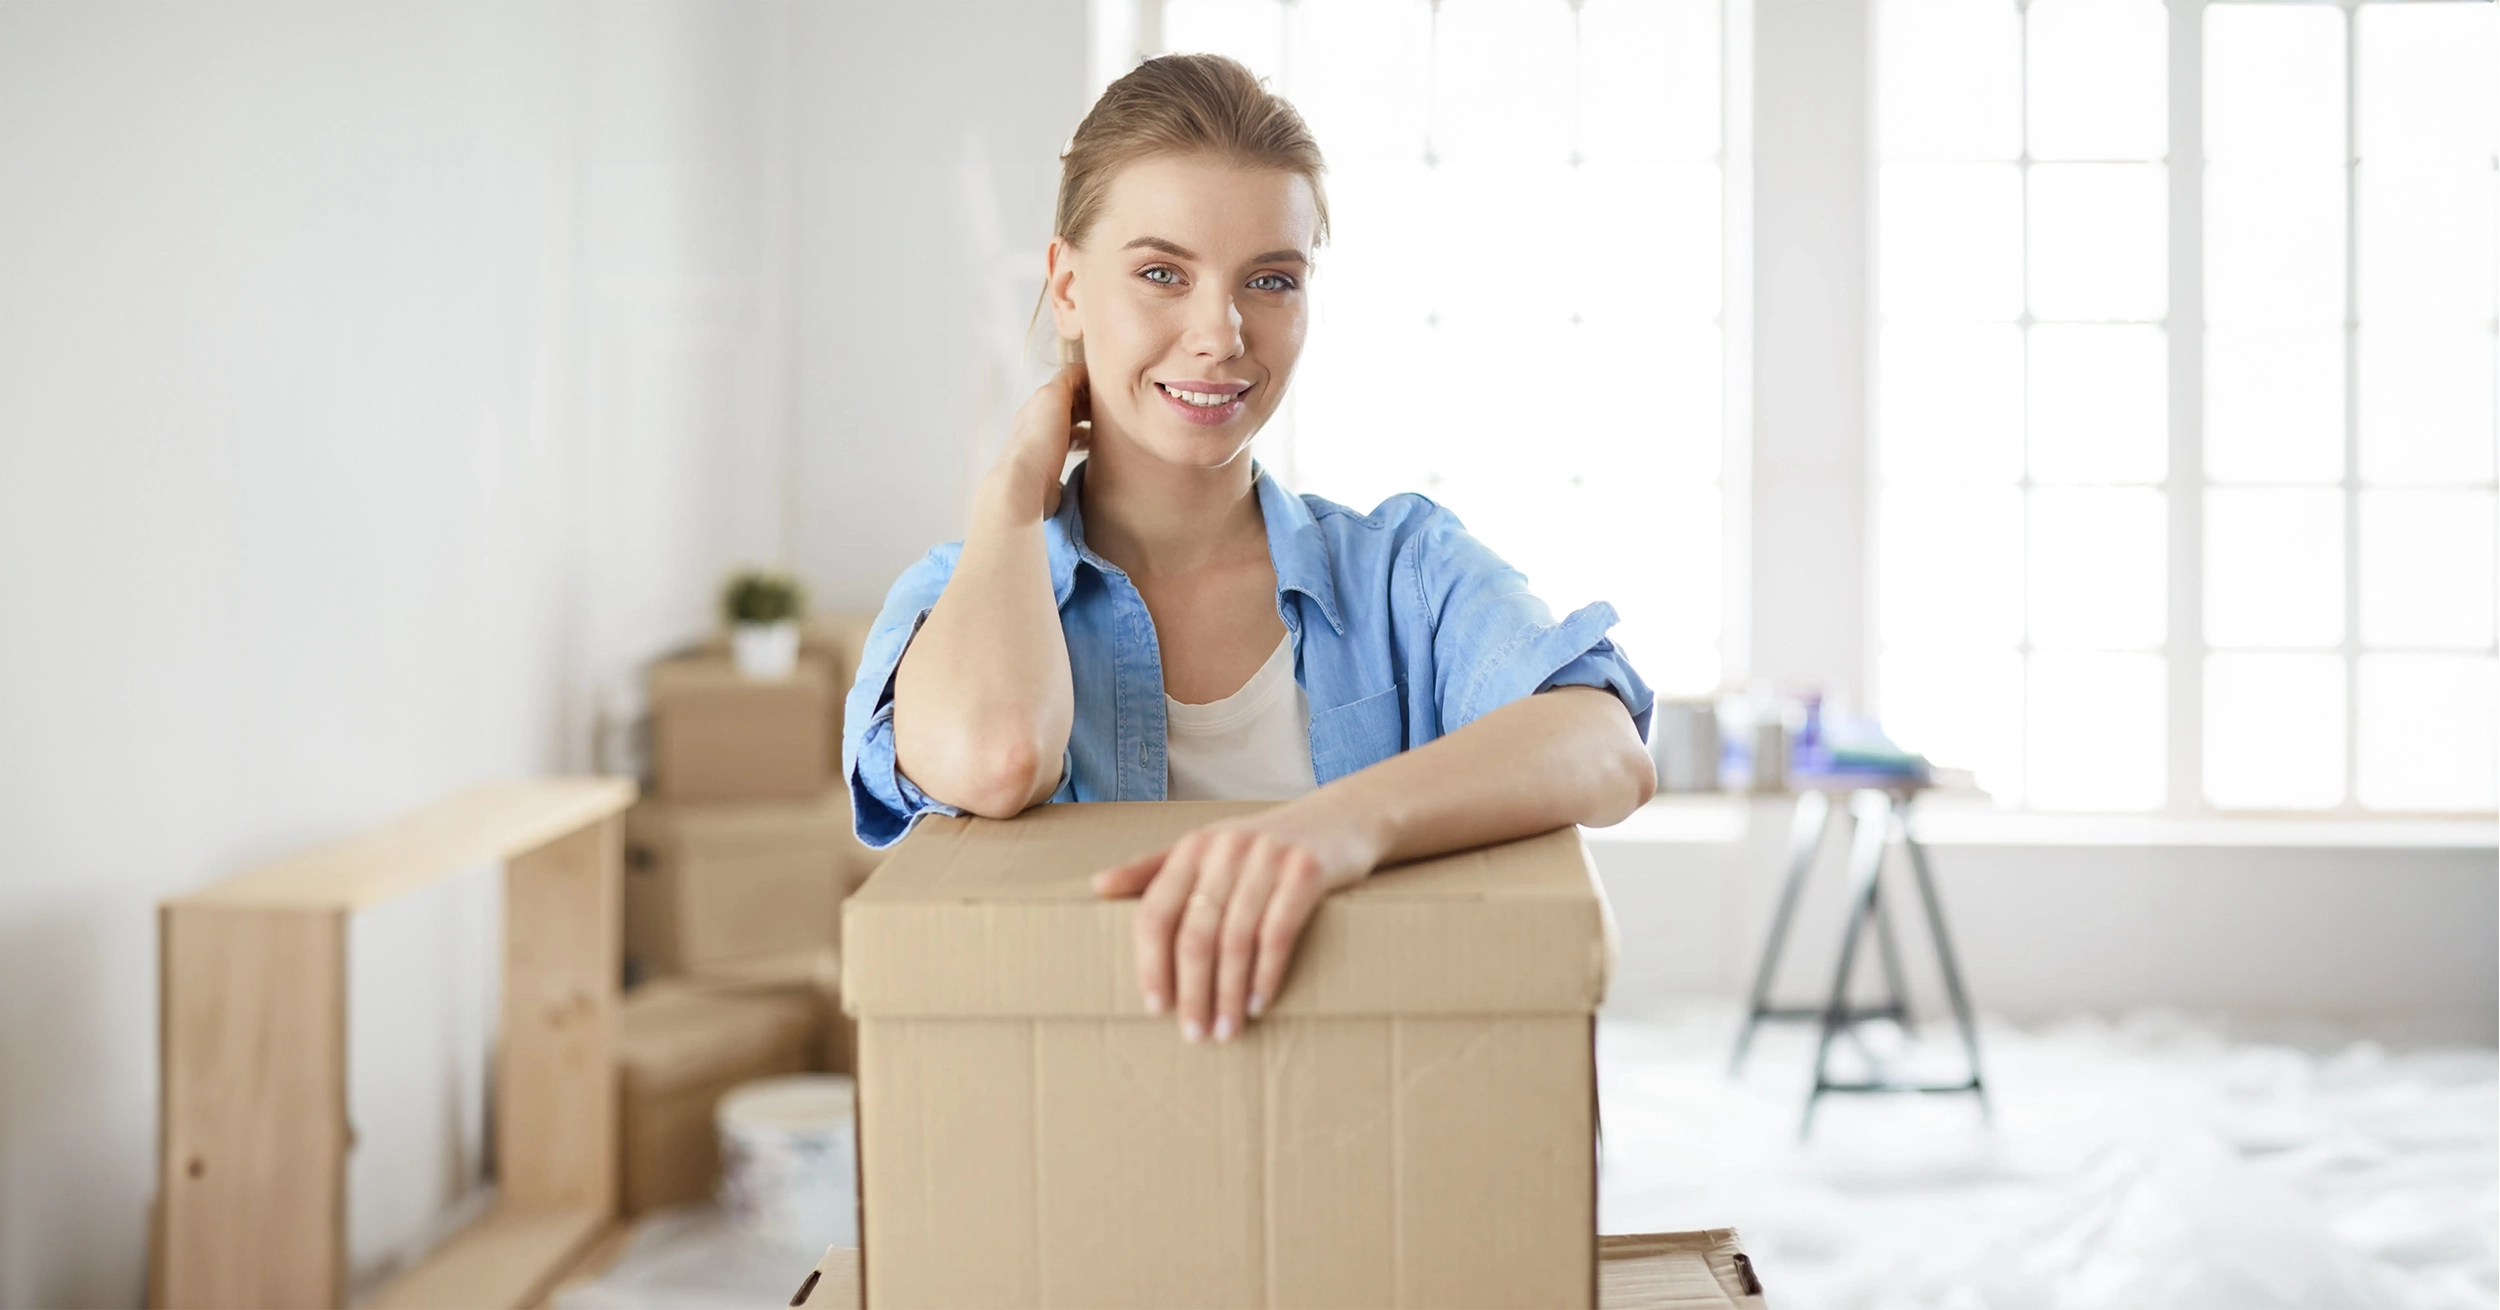 Unbeatable Value for Caringbah Moves: